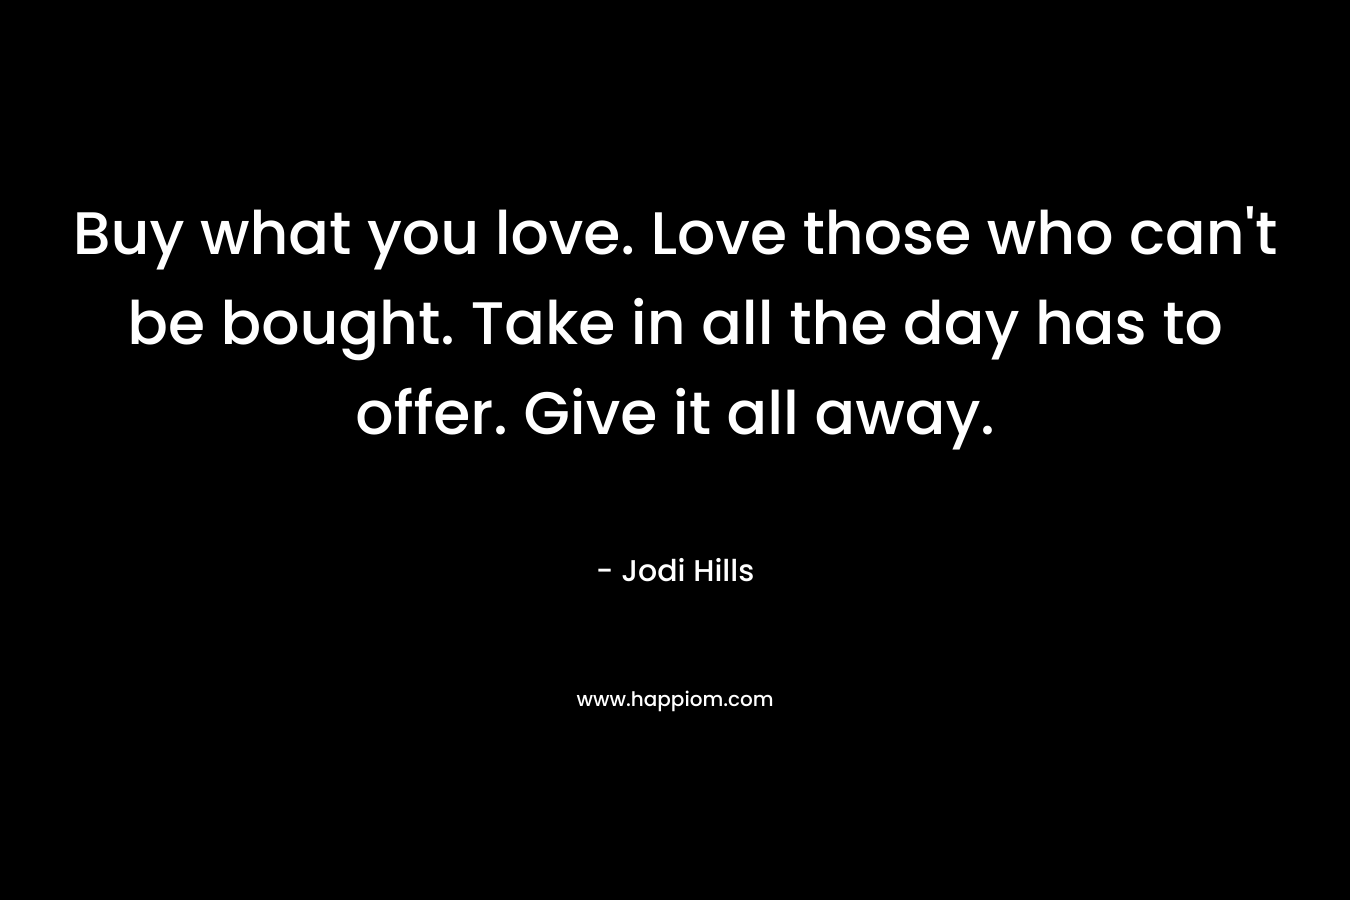 Buy what you love. Love those who can't be bought. Take in all the day has to offer. Give it all away.